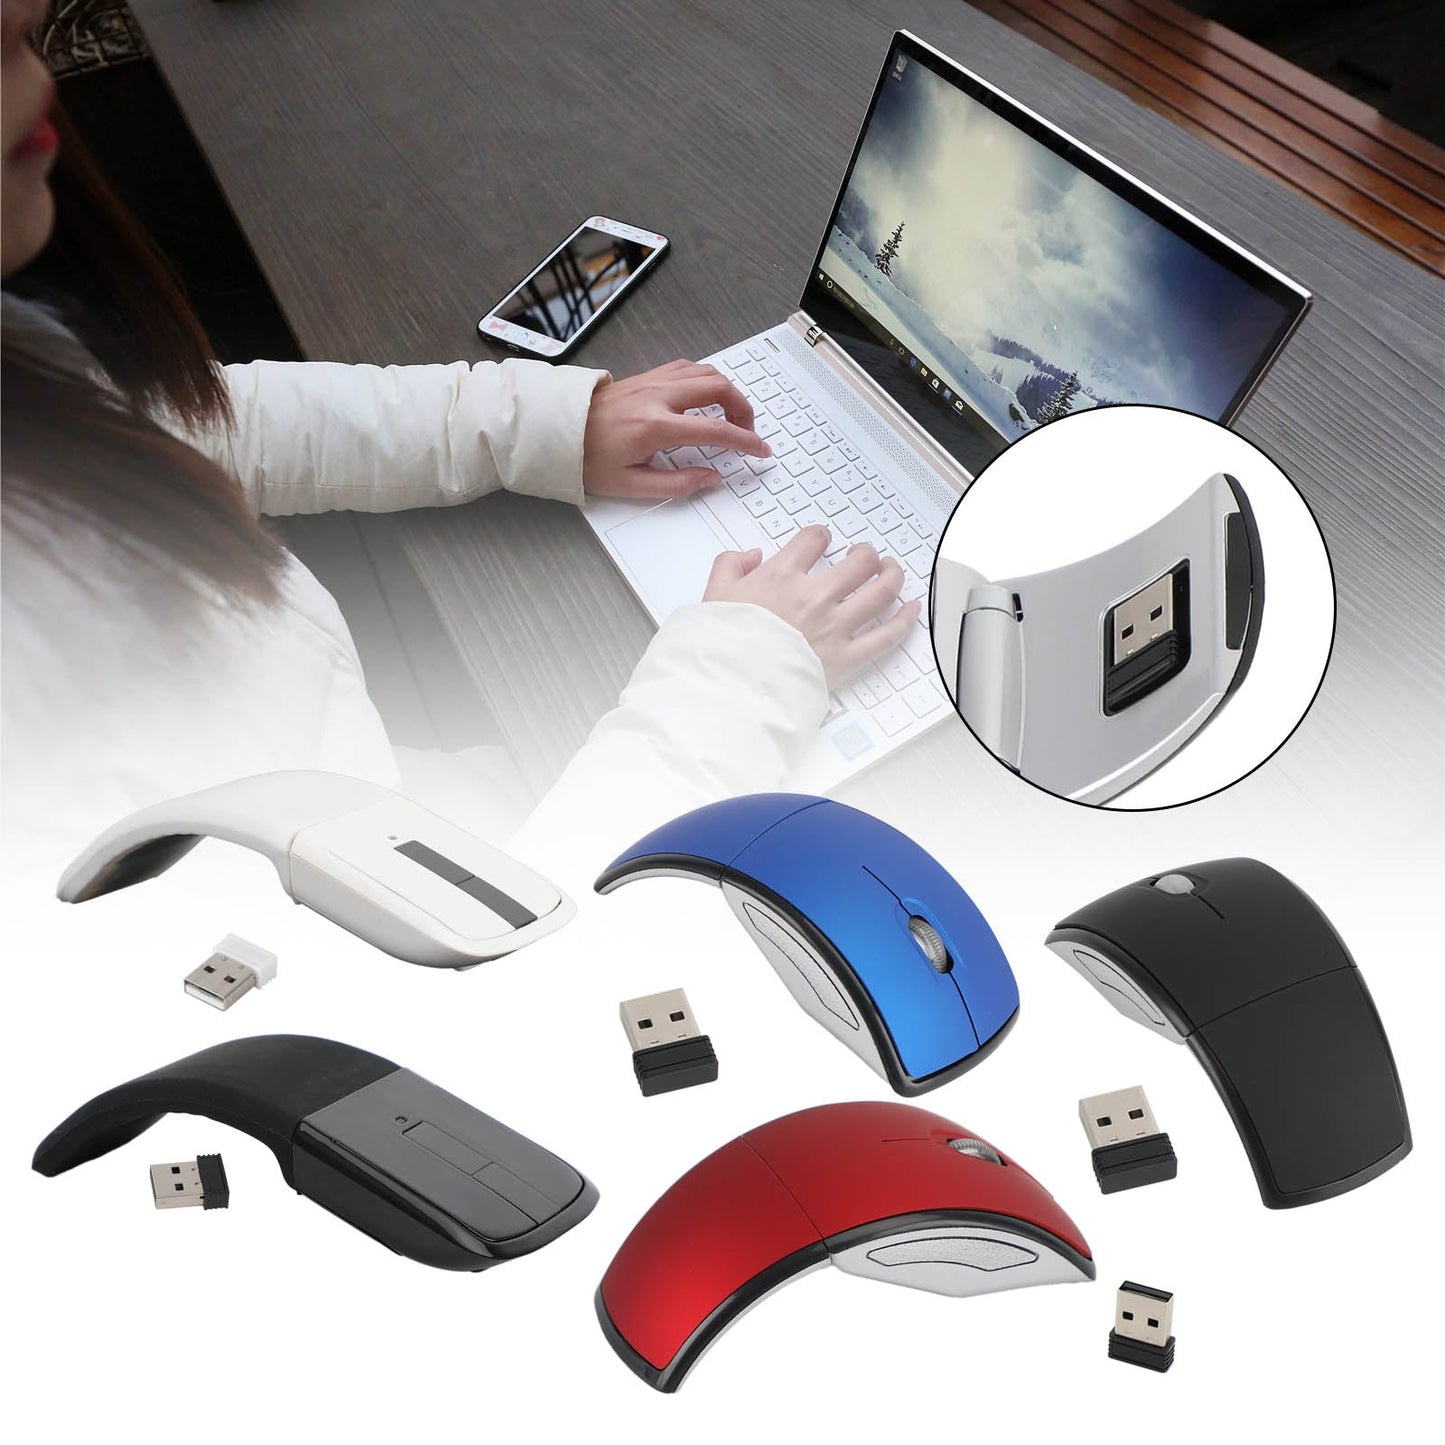 2.4Ghz Wireless Foldable Folding Arc Optical Mouse for Laptop Notebook Black